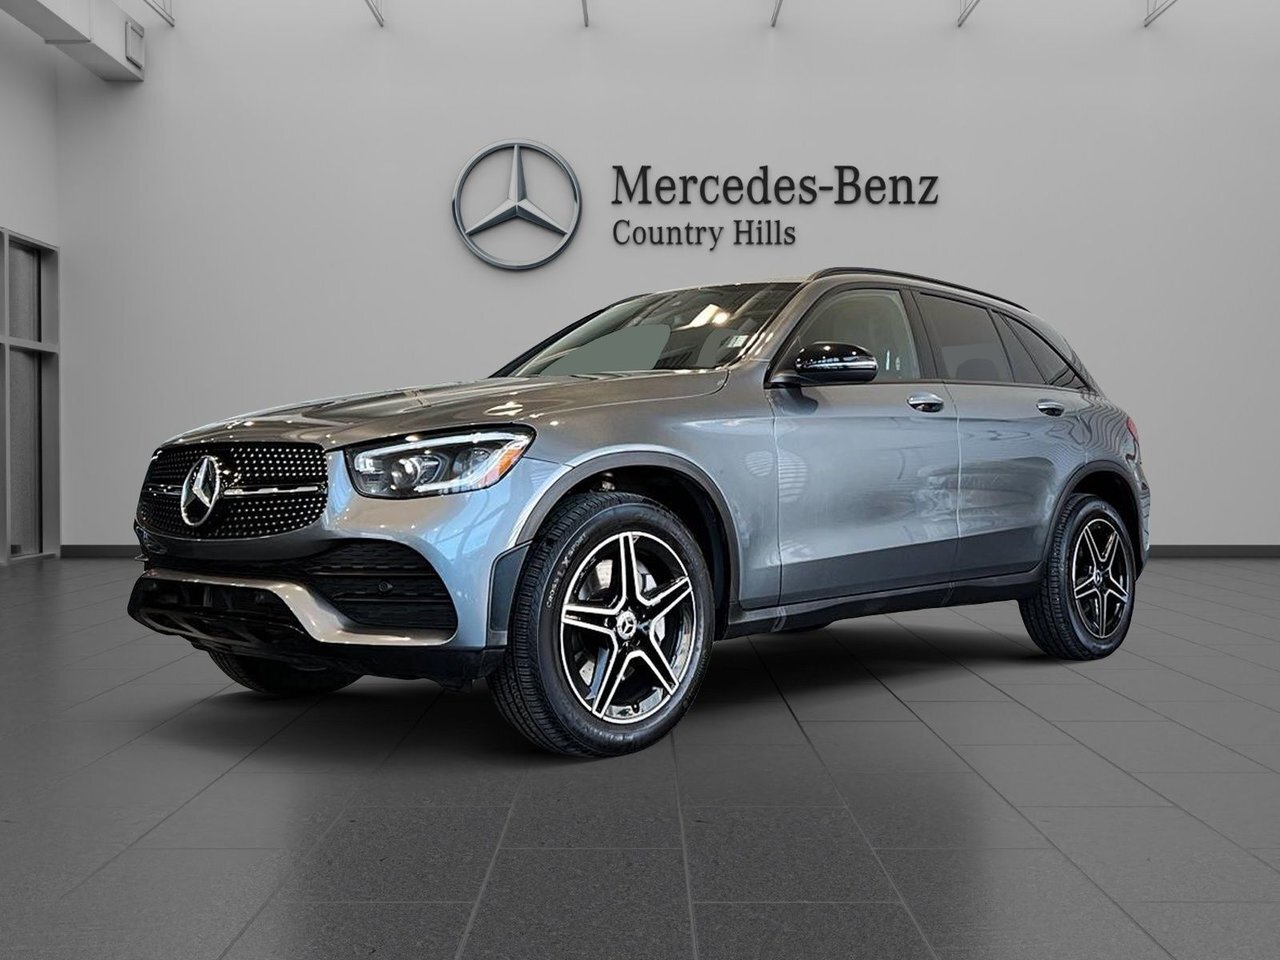 2020 Mercedes-Benz GLC300 4MATIC SUV One owner! AMG Night package!